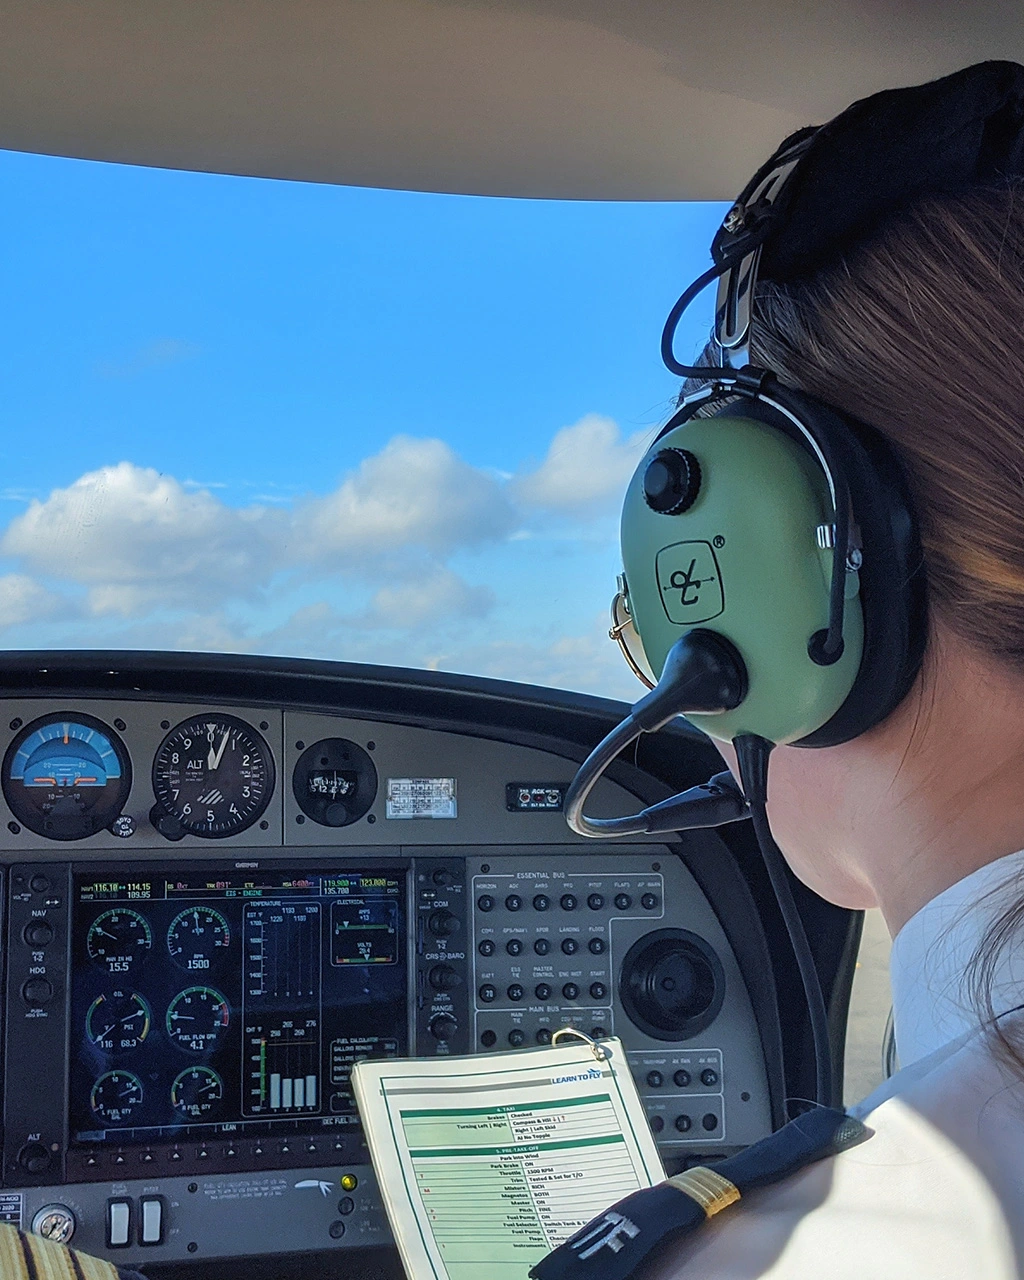 Pilot and Aircraft Safety at Learn To Fly